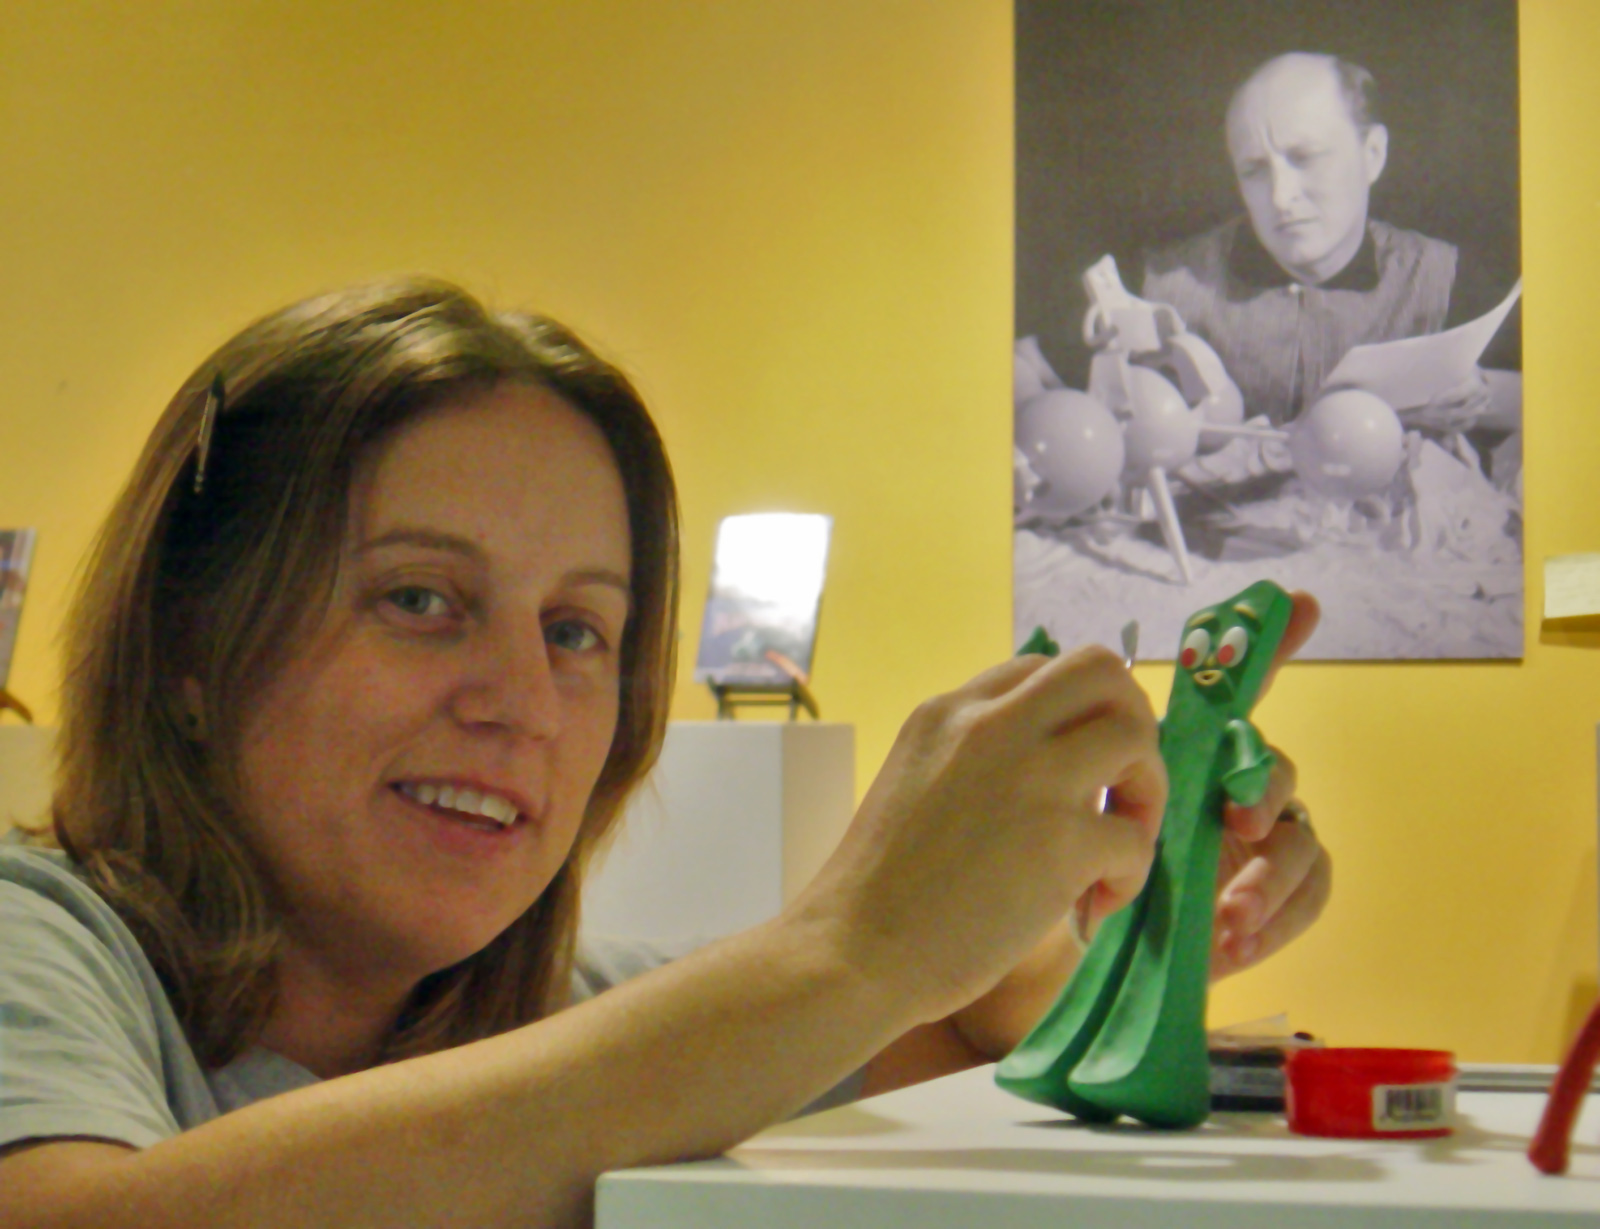 Nicole LaPointe McKay, Gumby Puppet Maker